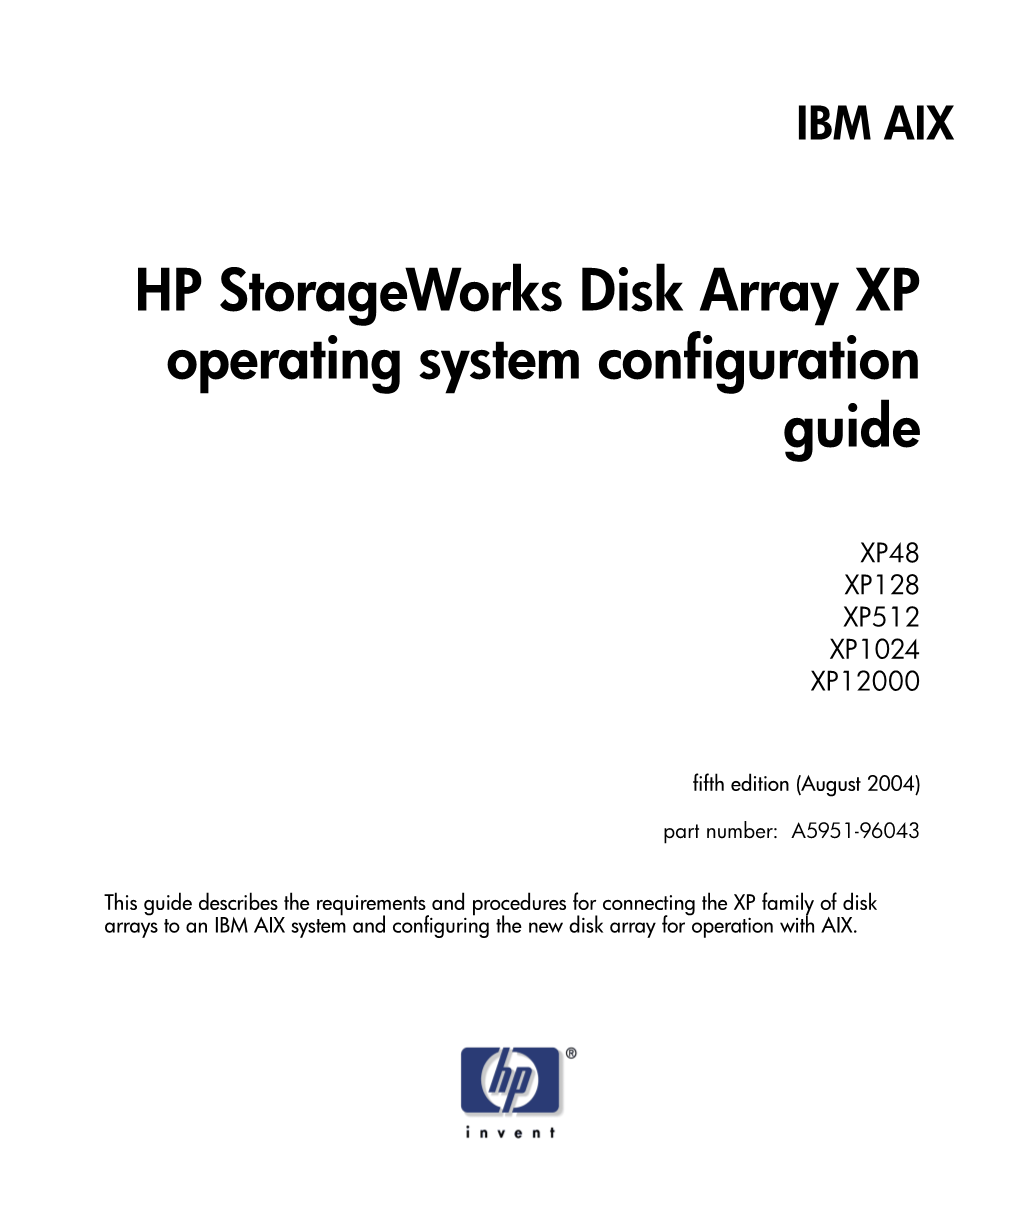 HP Storage Works Operating System Configuration Guide: IBM